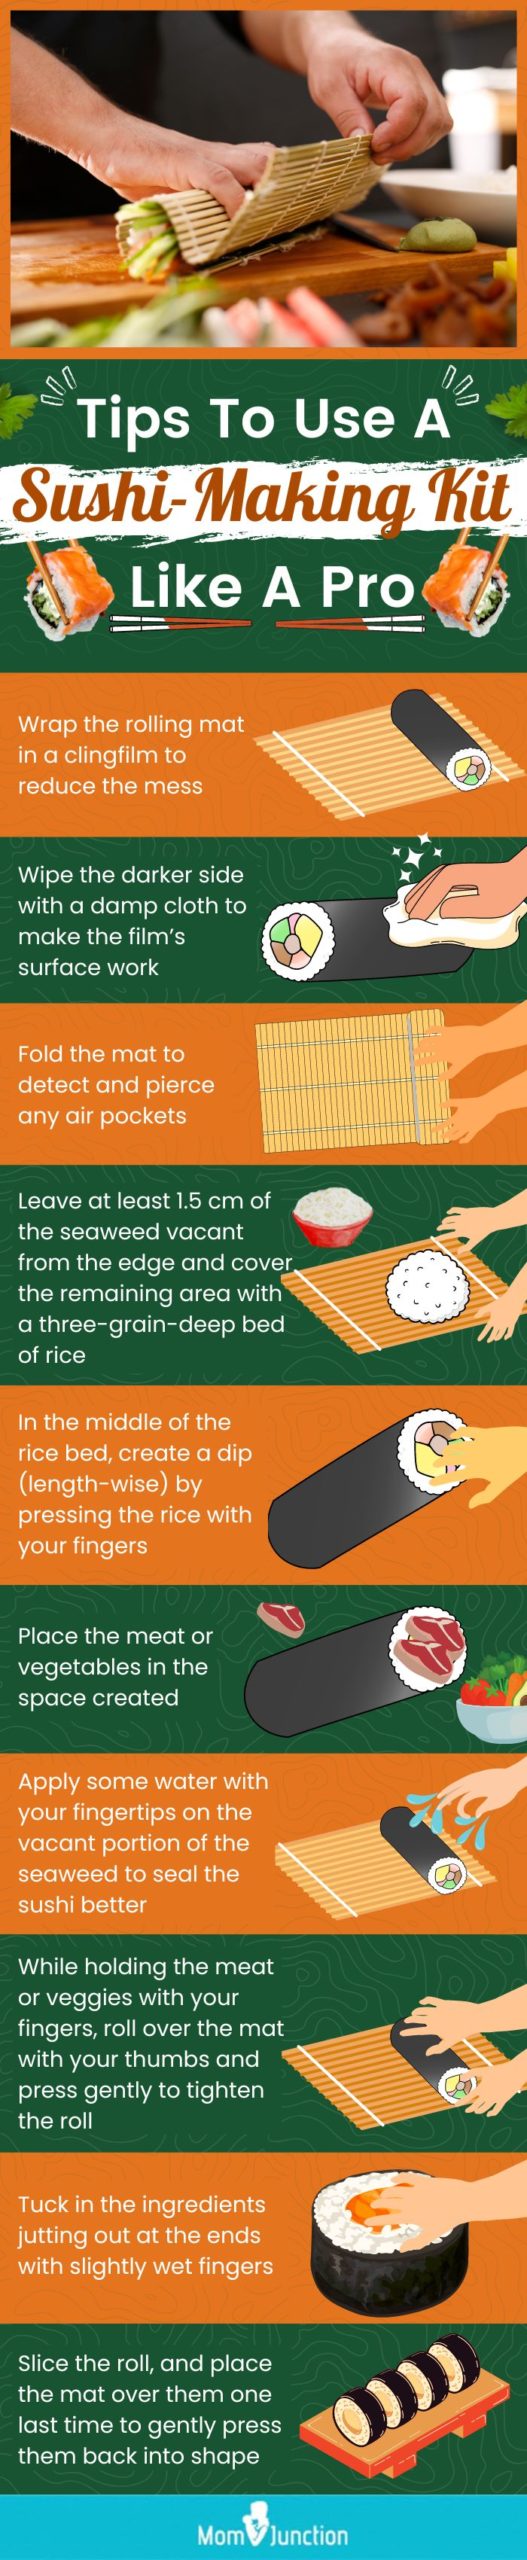 Tips To Use A Sushi-Making Kit Like A Pro